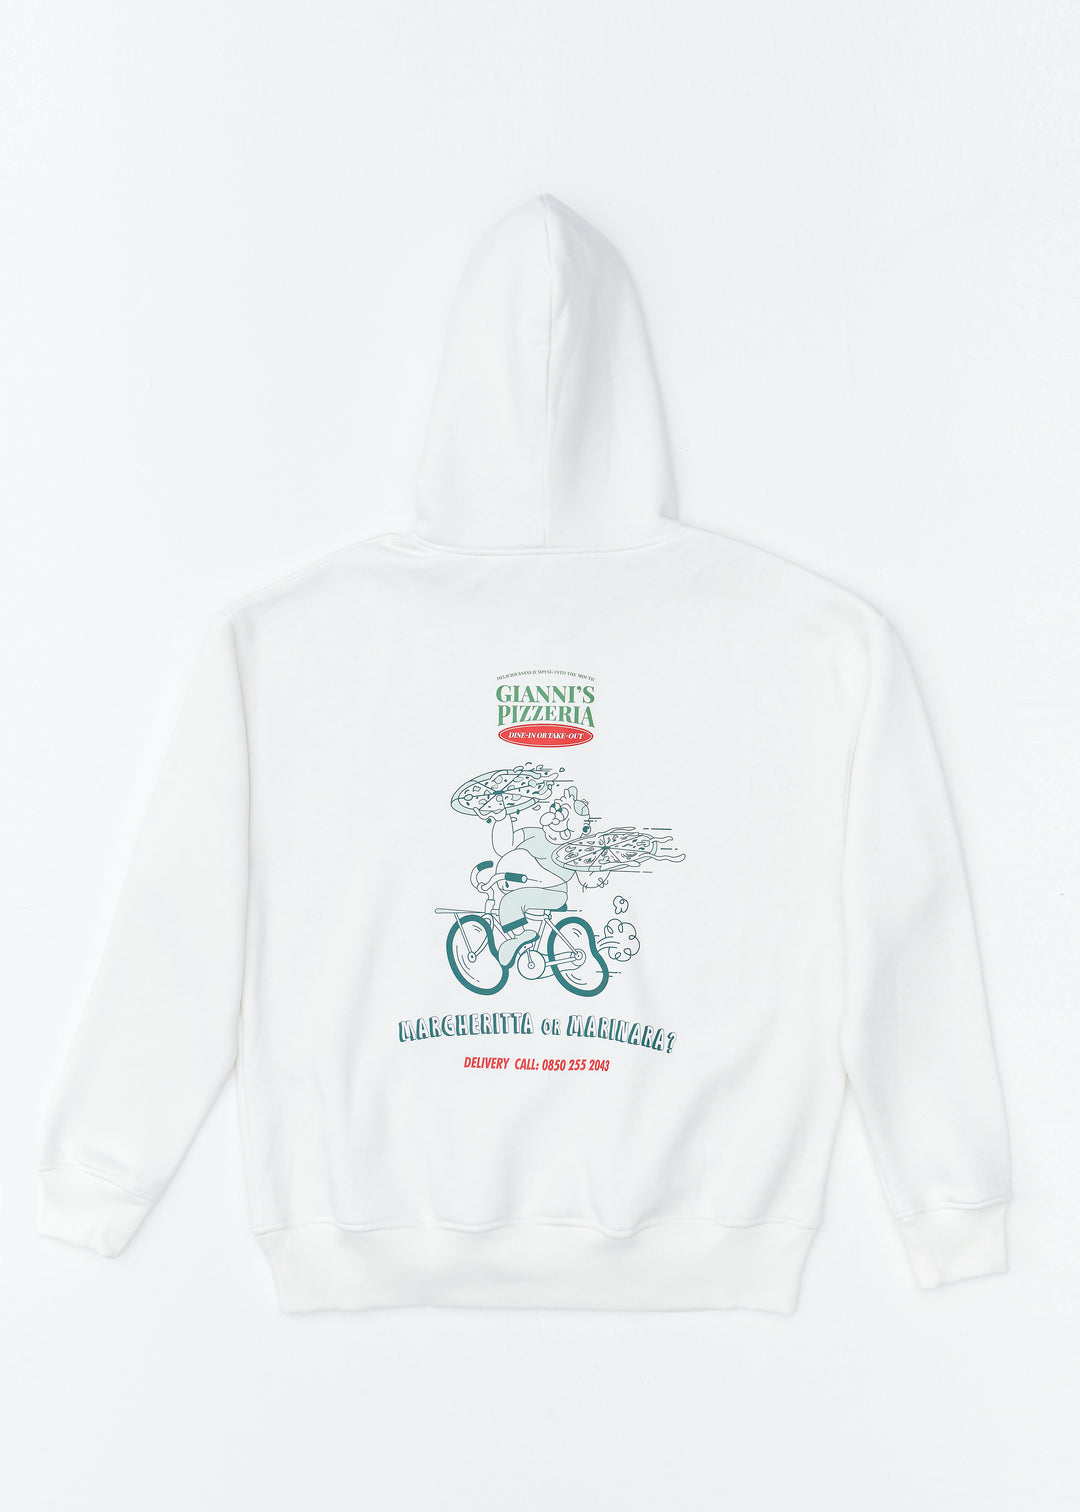 Giannis Pizzeria / Oversized Pullover Hoodie